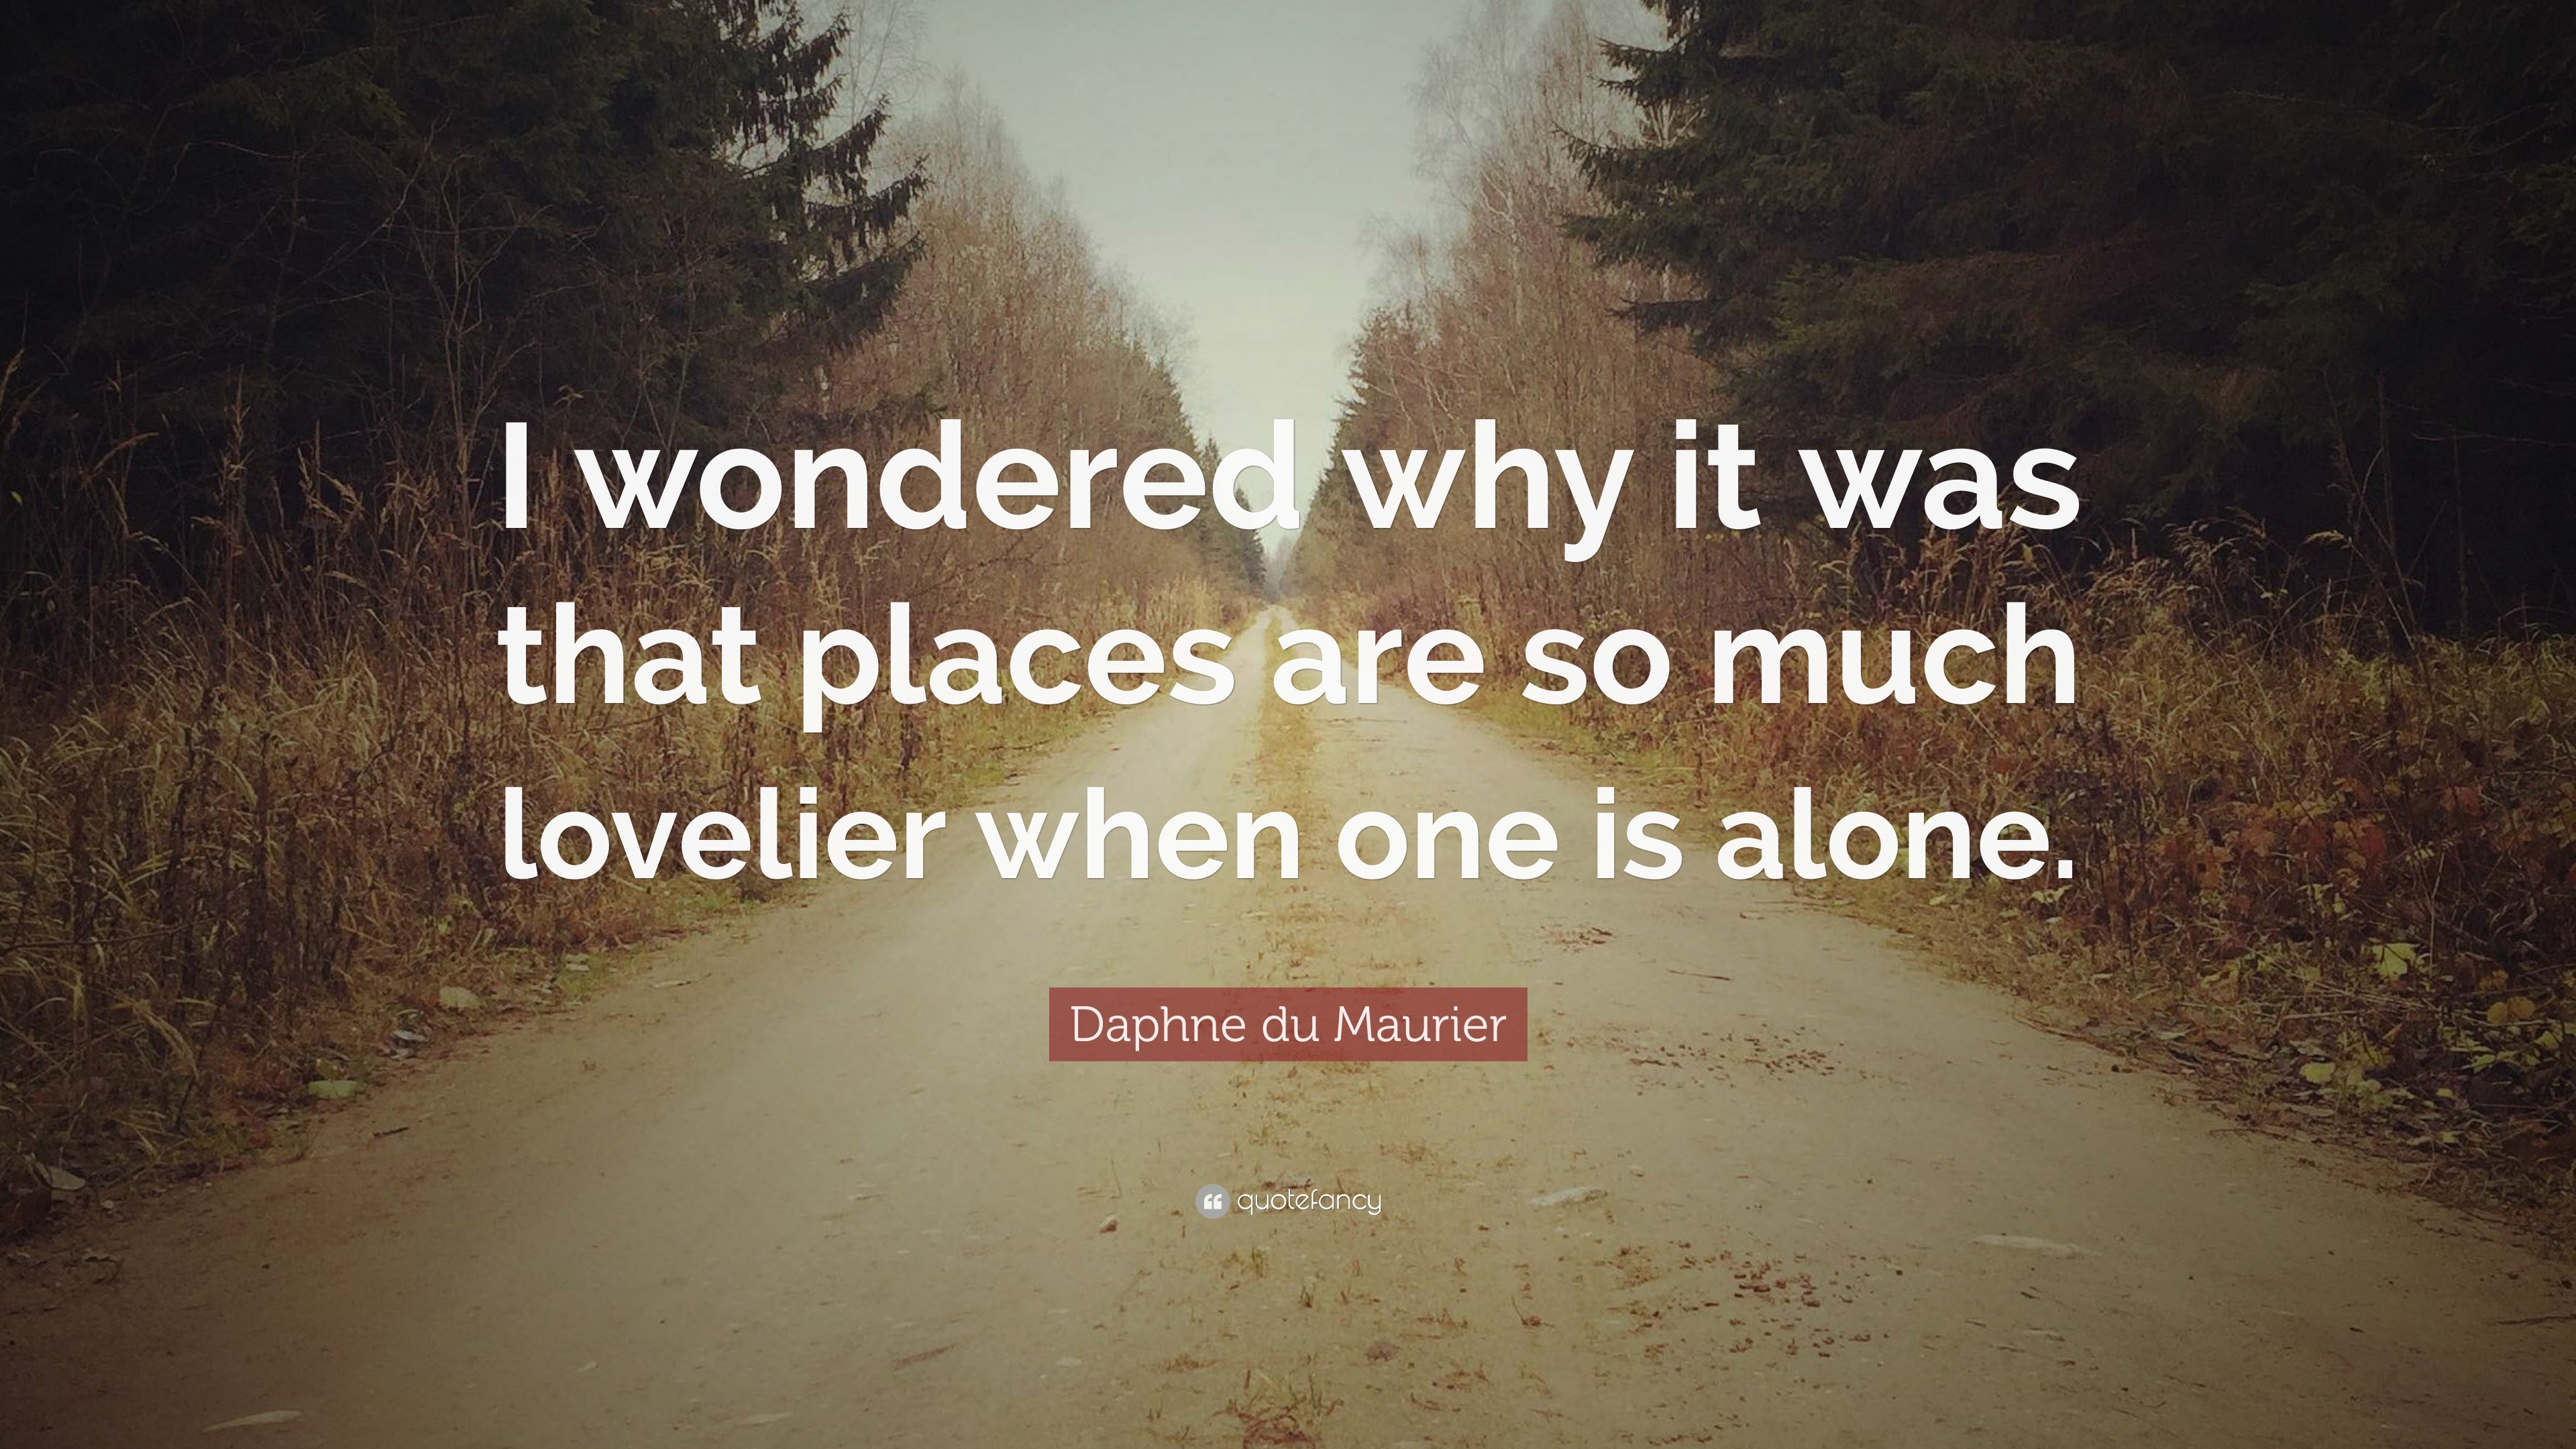 Daphne du Maurier Quote: “I wondered why it was that places are so much